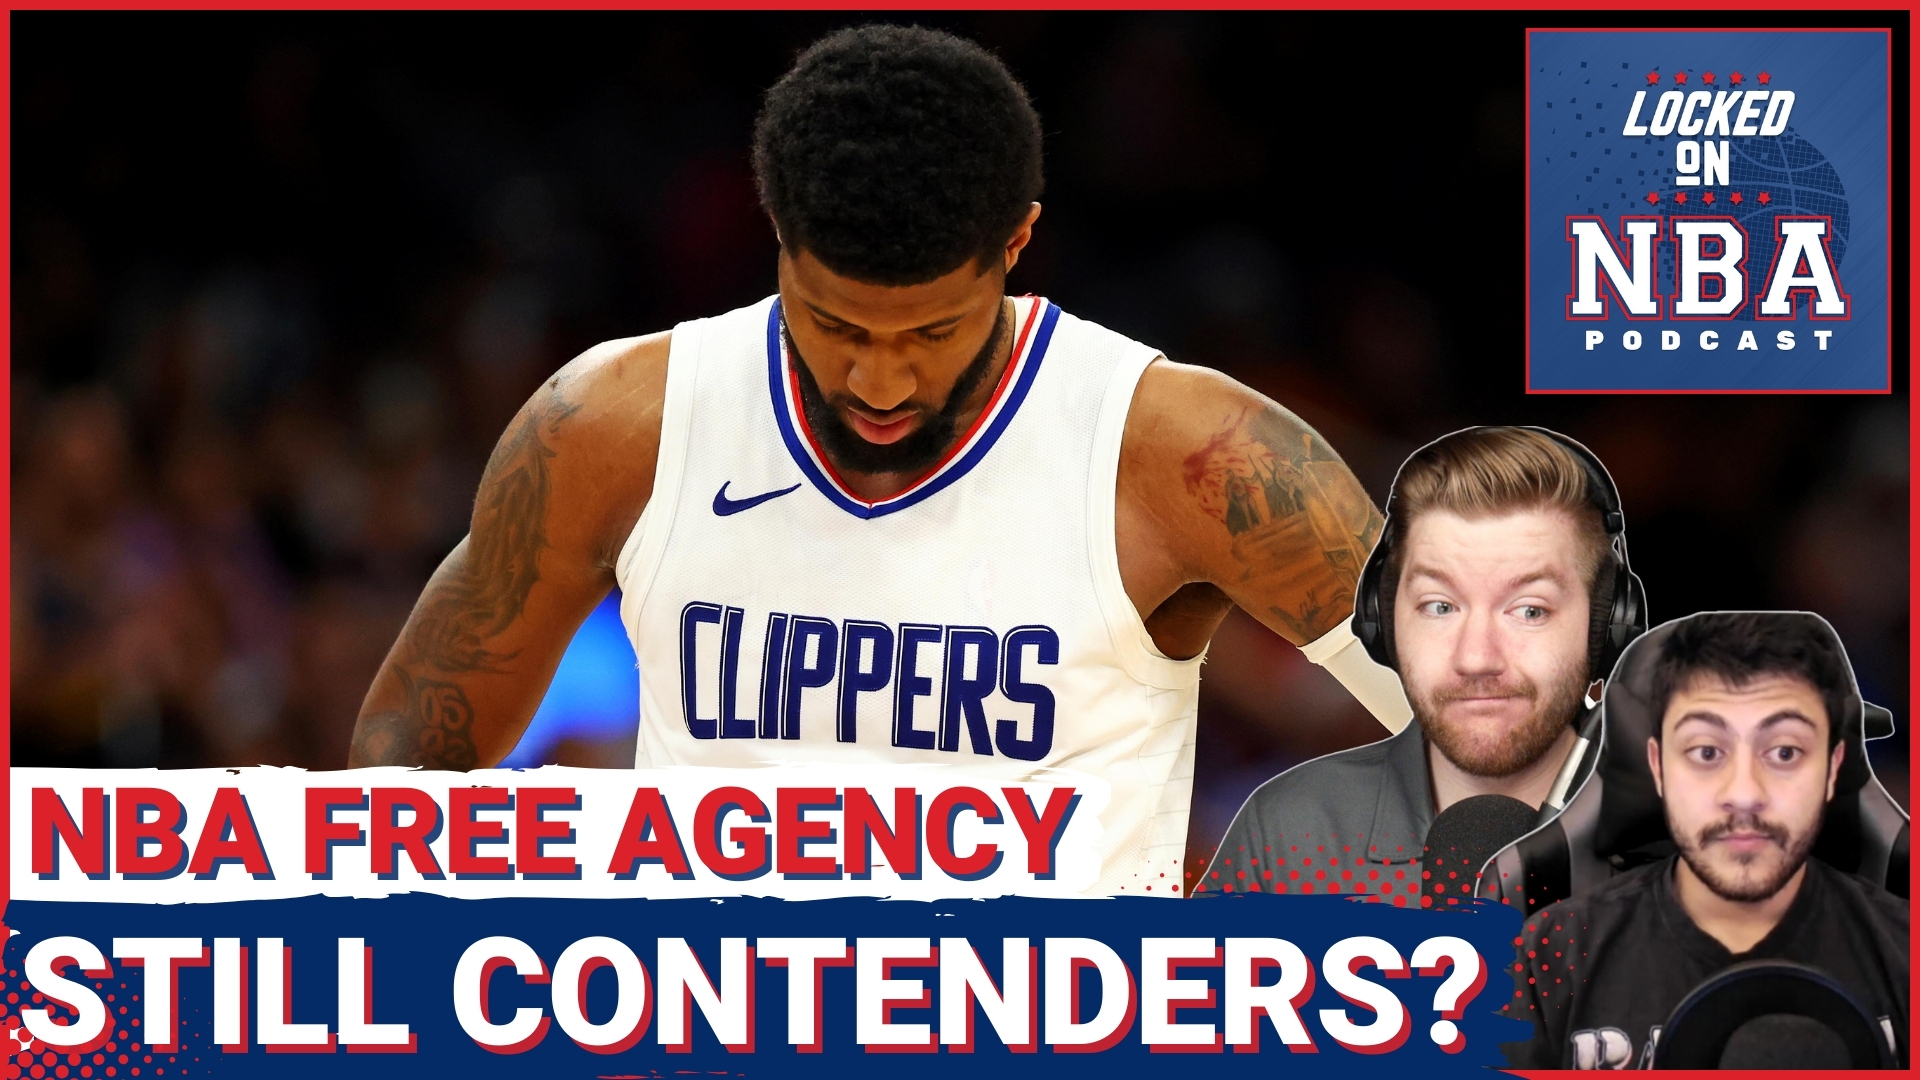 Clippers Lose PG13 To 76ers... Still Contenders? | Pistons Fire Monty, Hire Bickerstaff, Cap Space Goals? | Magic Sign KCP, More Moves Coming?